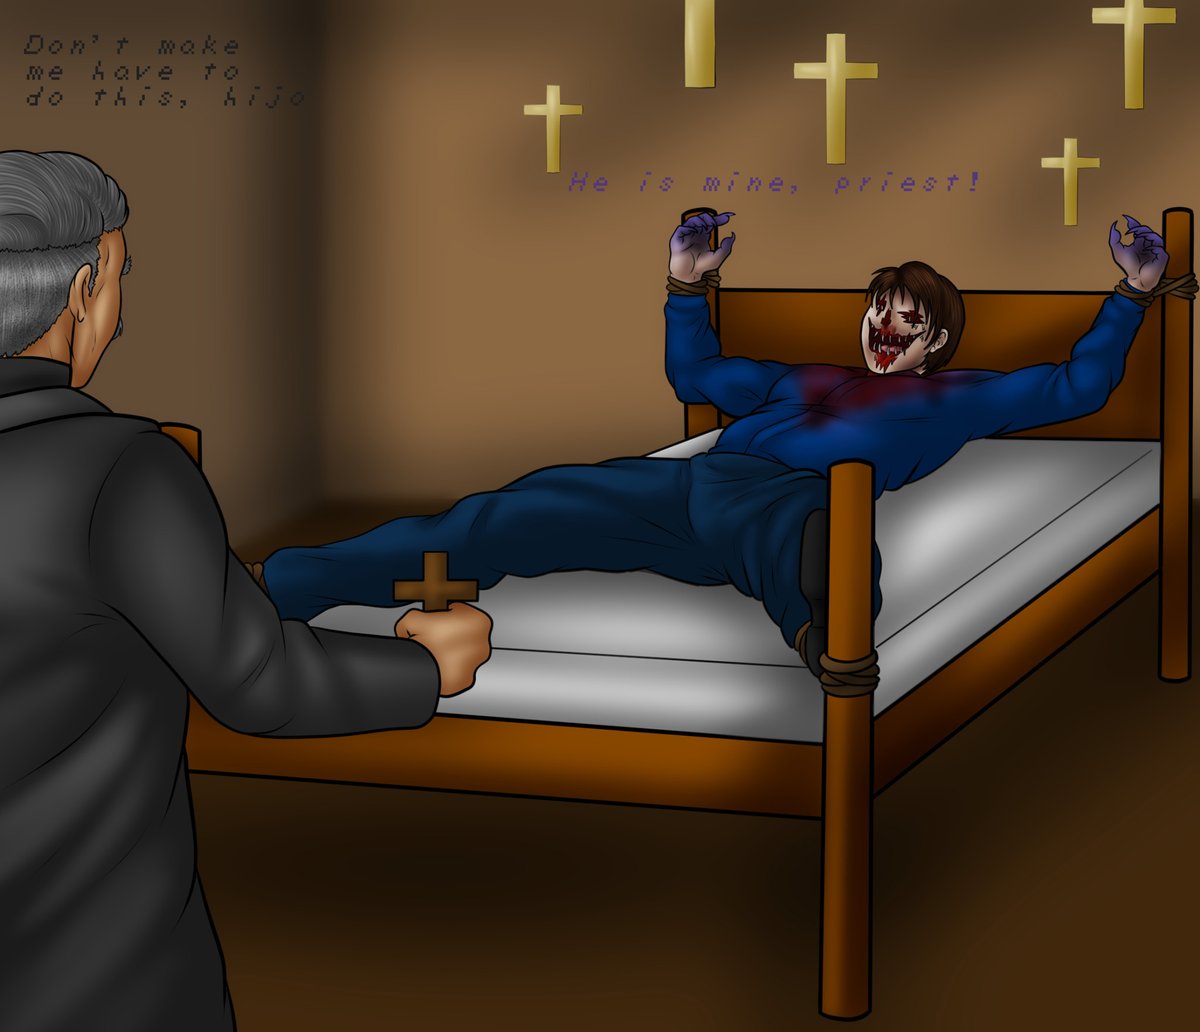 Now updated with shading.
What-if spinoff idea from chapter 3's ending 1.
#faithgame #faiththeunholytrinity
@airdorf